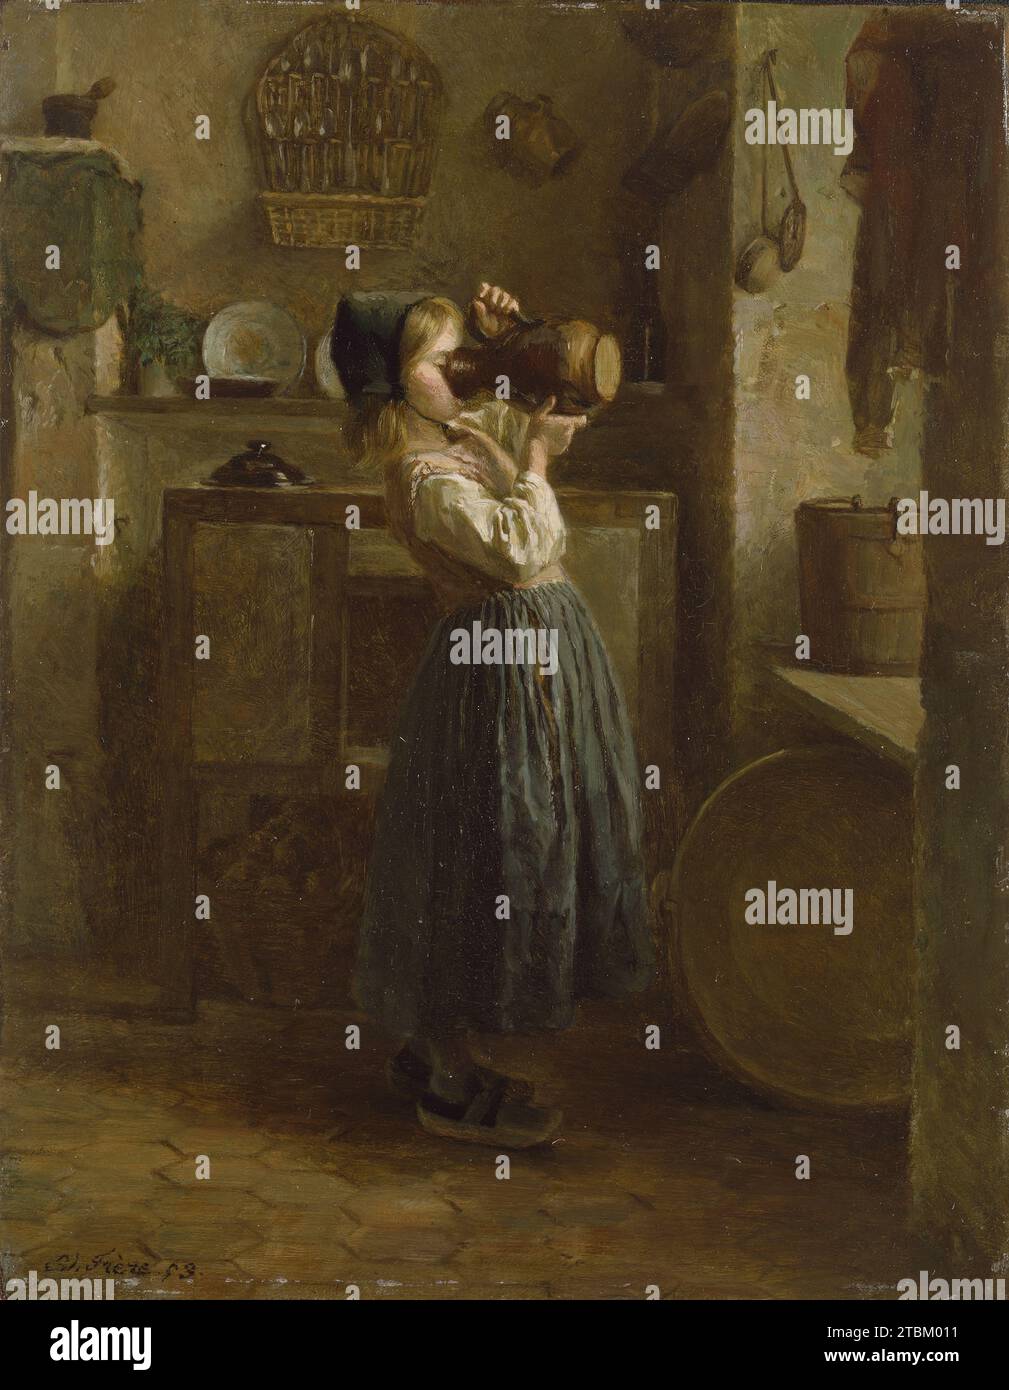 Helping Herself, 1859.  A young girl stands in a larder drinking milk directly from a pitcher. Light from a window at the right illuminates the interior, revealing various utensils, including a rack of pewter spoons hanging on the back wall, a shelf of dishes, a cupboard, a wooden dairy bucket, and several strainers. The floor is laid in earthenware hexagonal tiles. Stock Photo